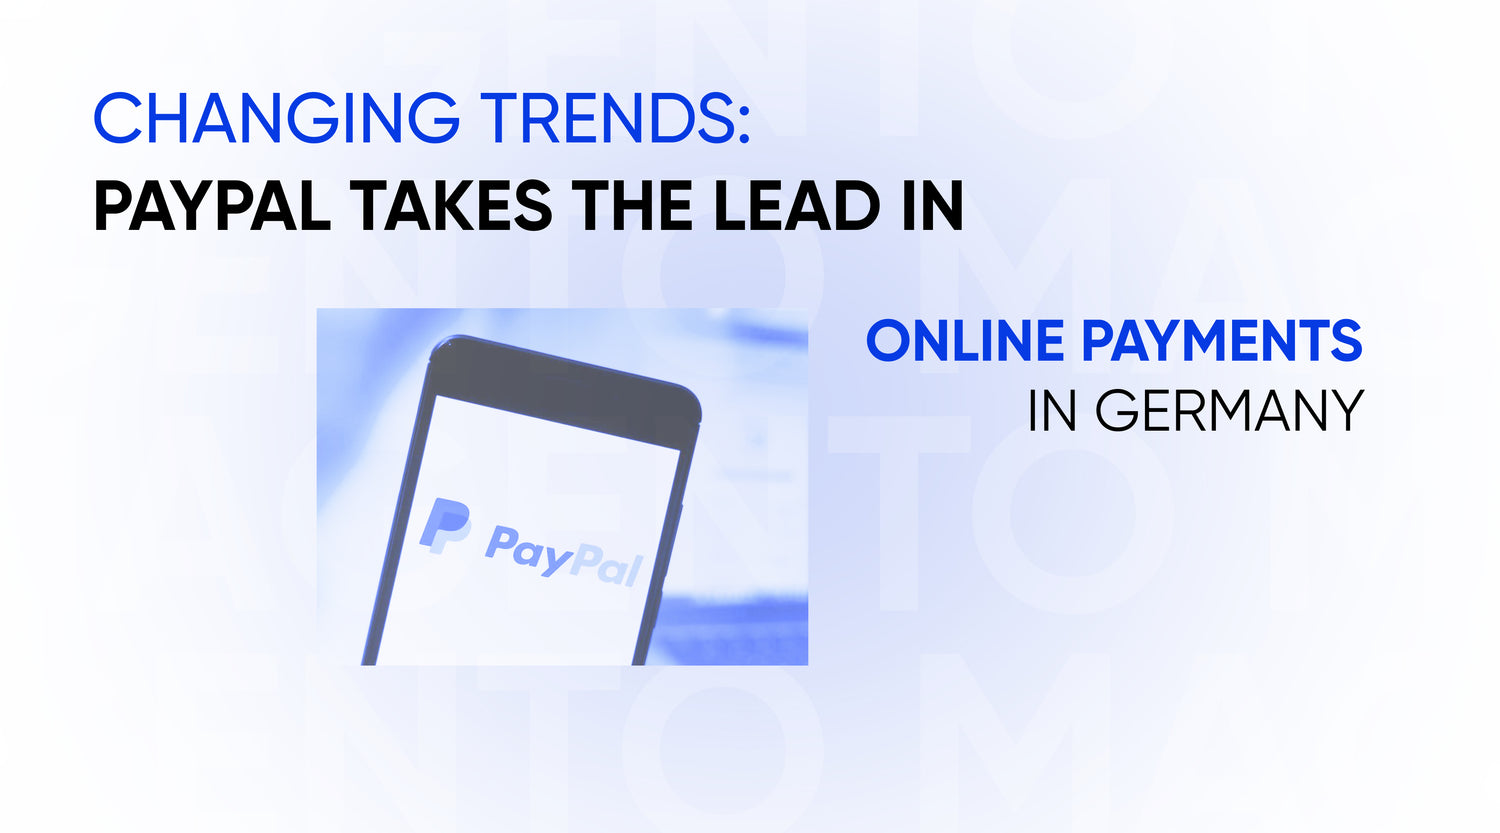 Changing trends: PayPal takes the lead in online payments in Germany